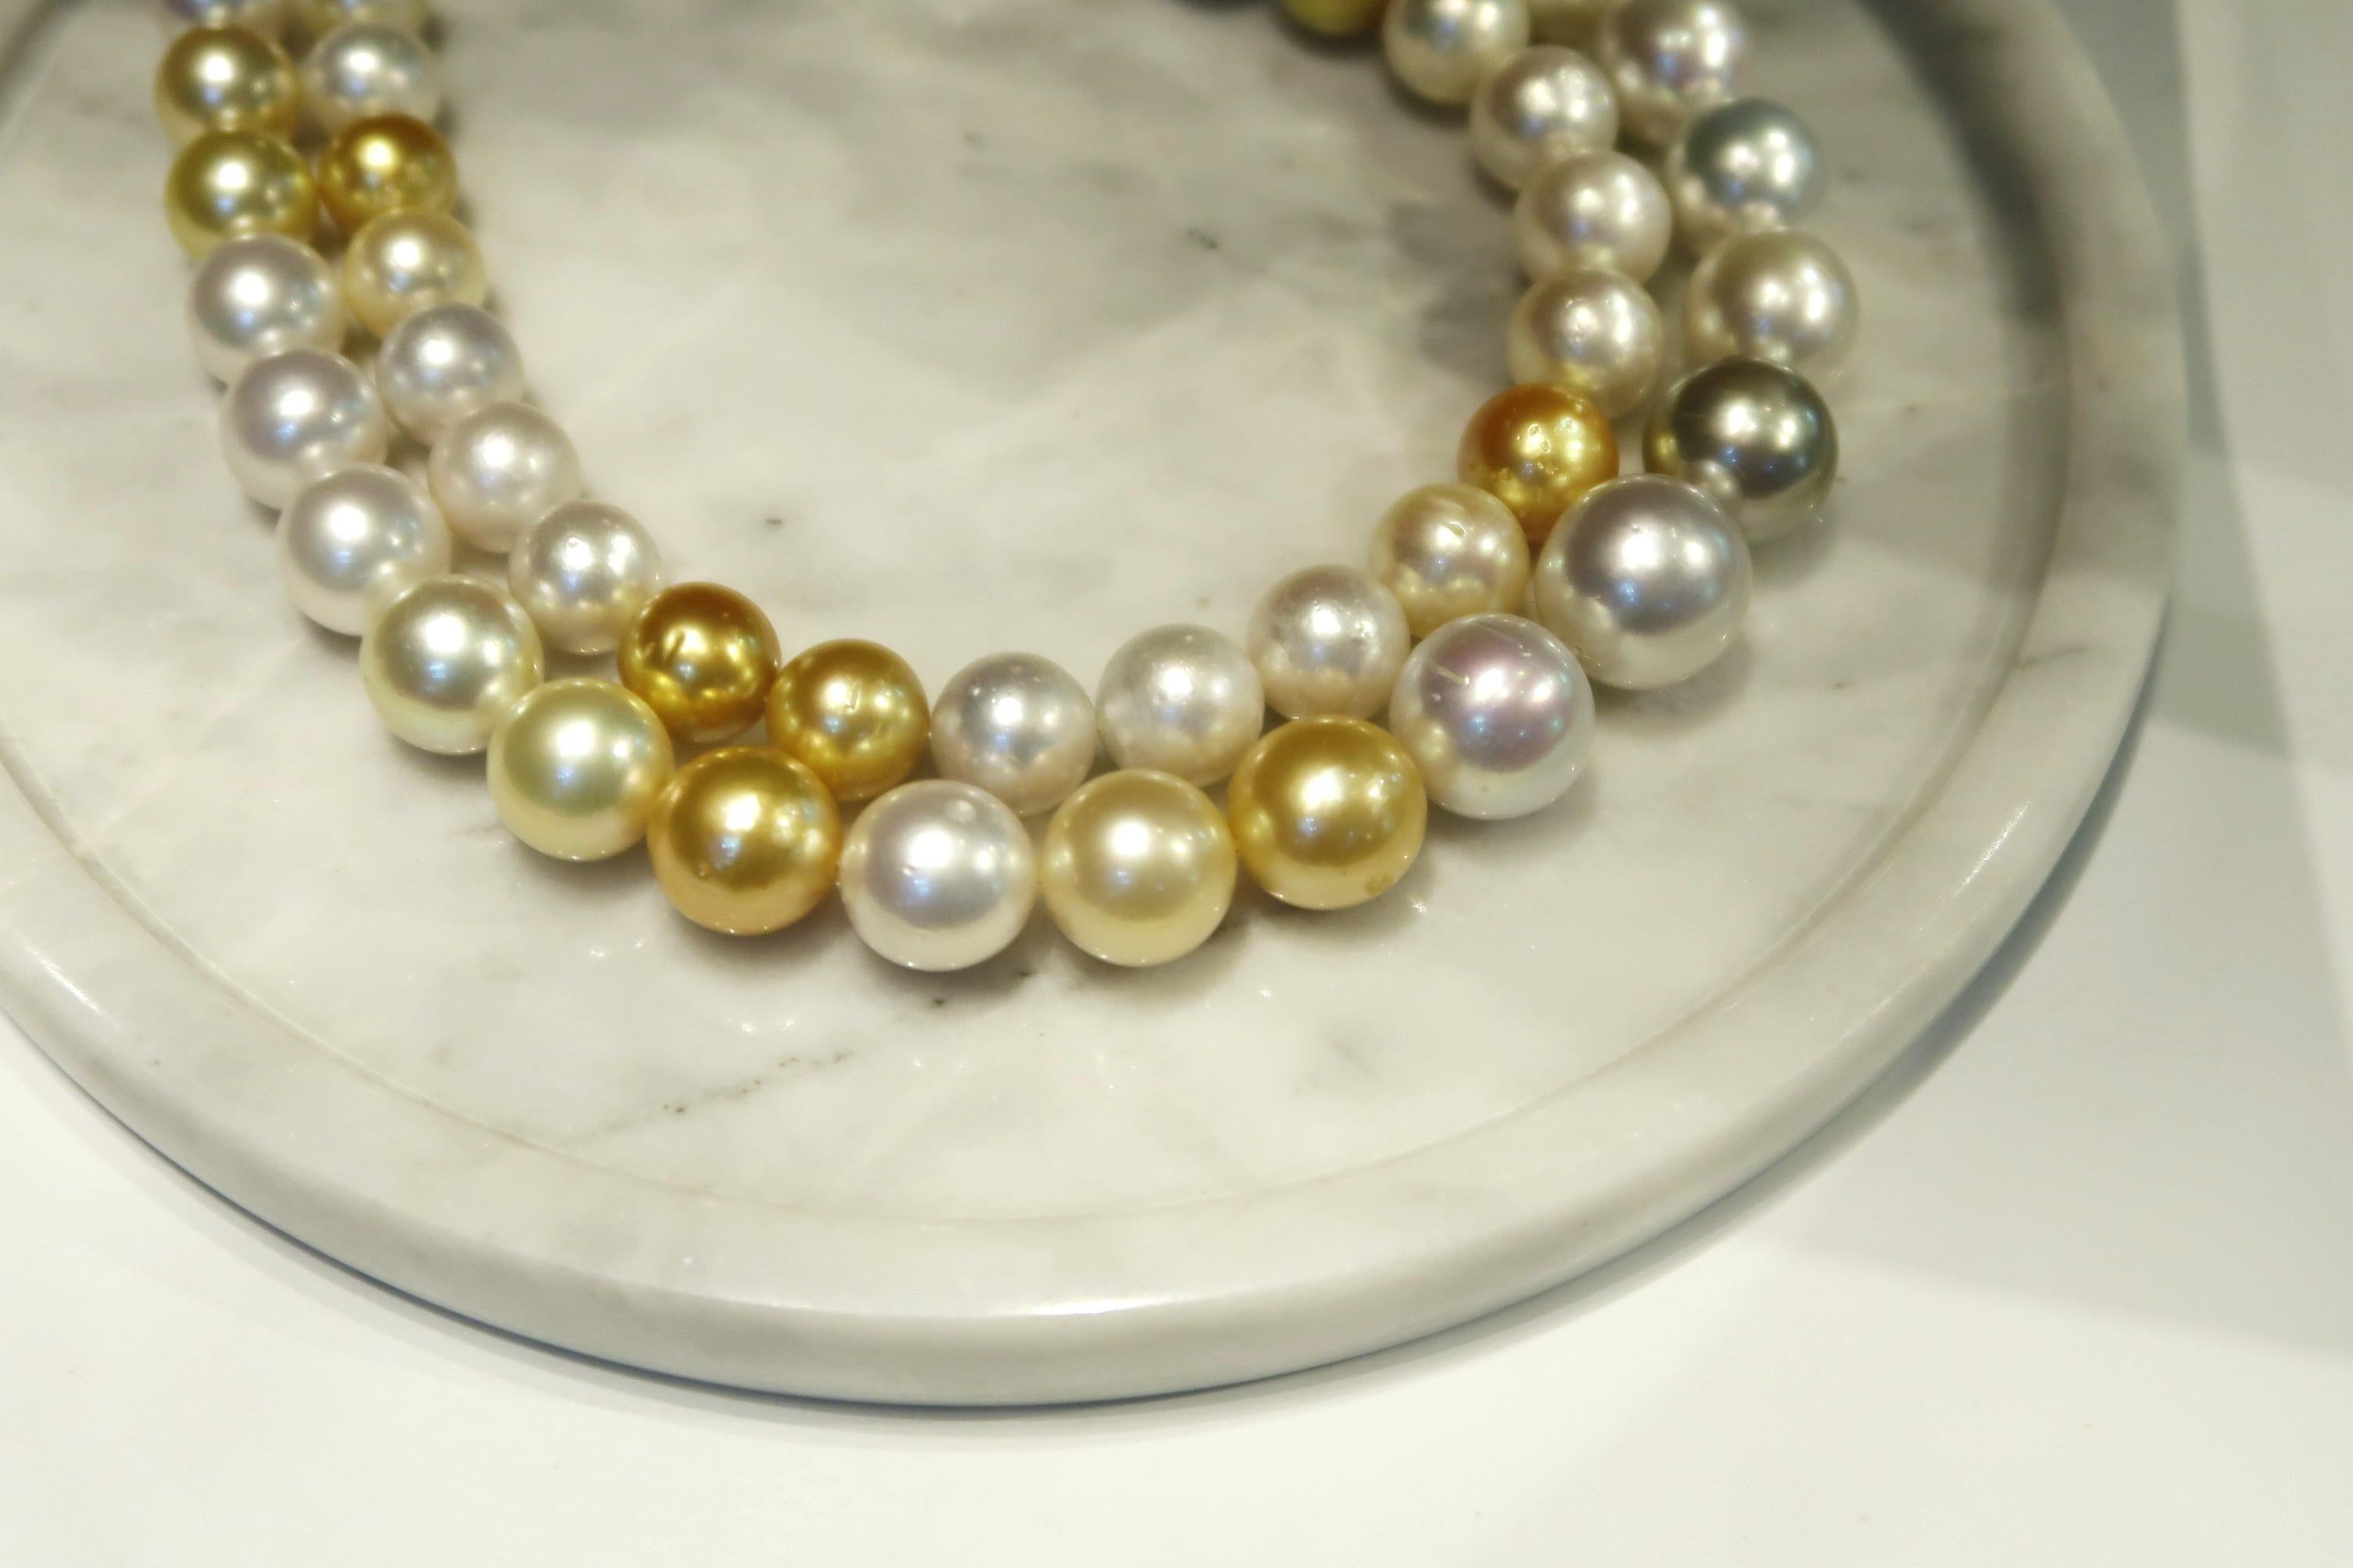 Bead Shades of Silvery White and Deep Gold South Sea Pearl Necklace For Sale